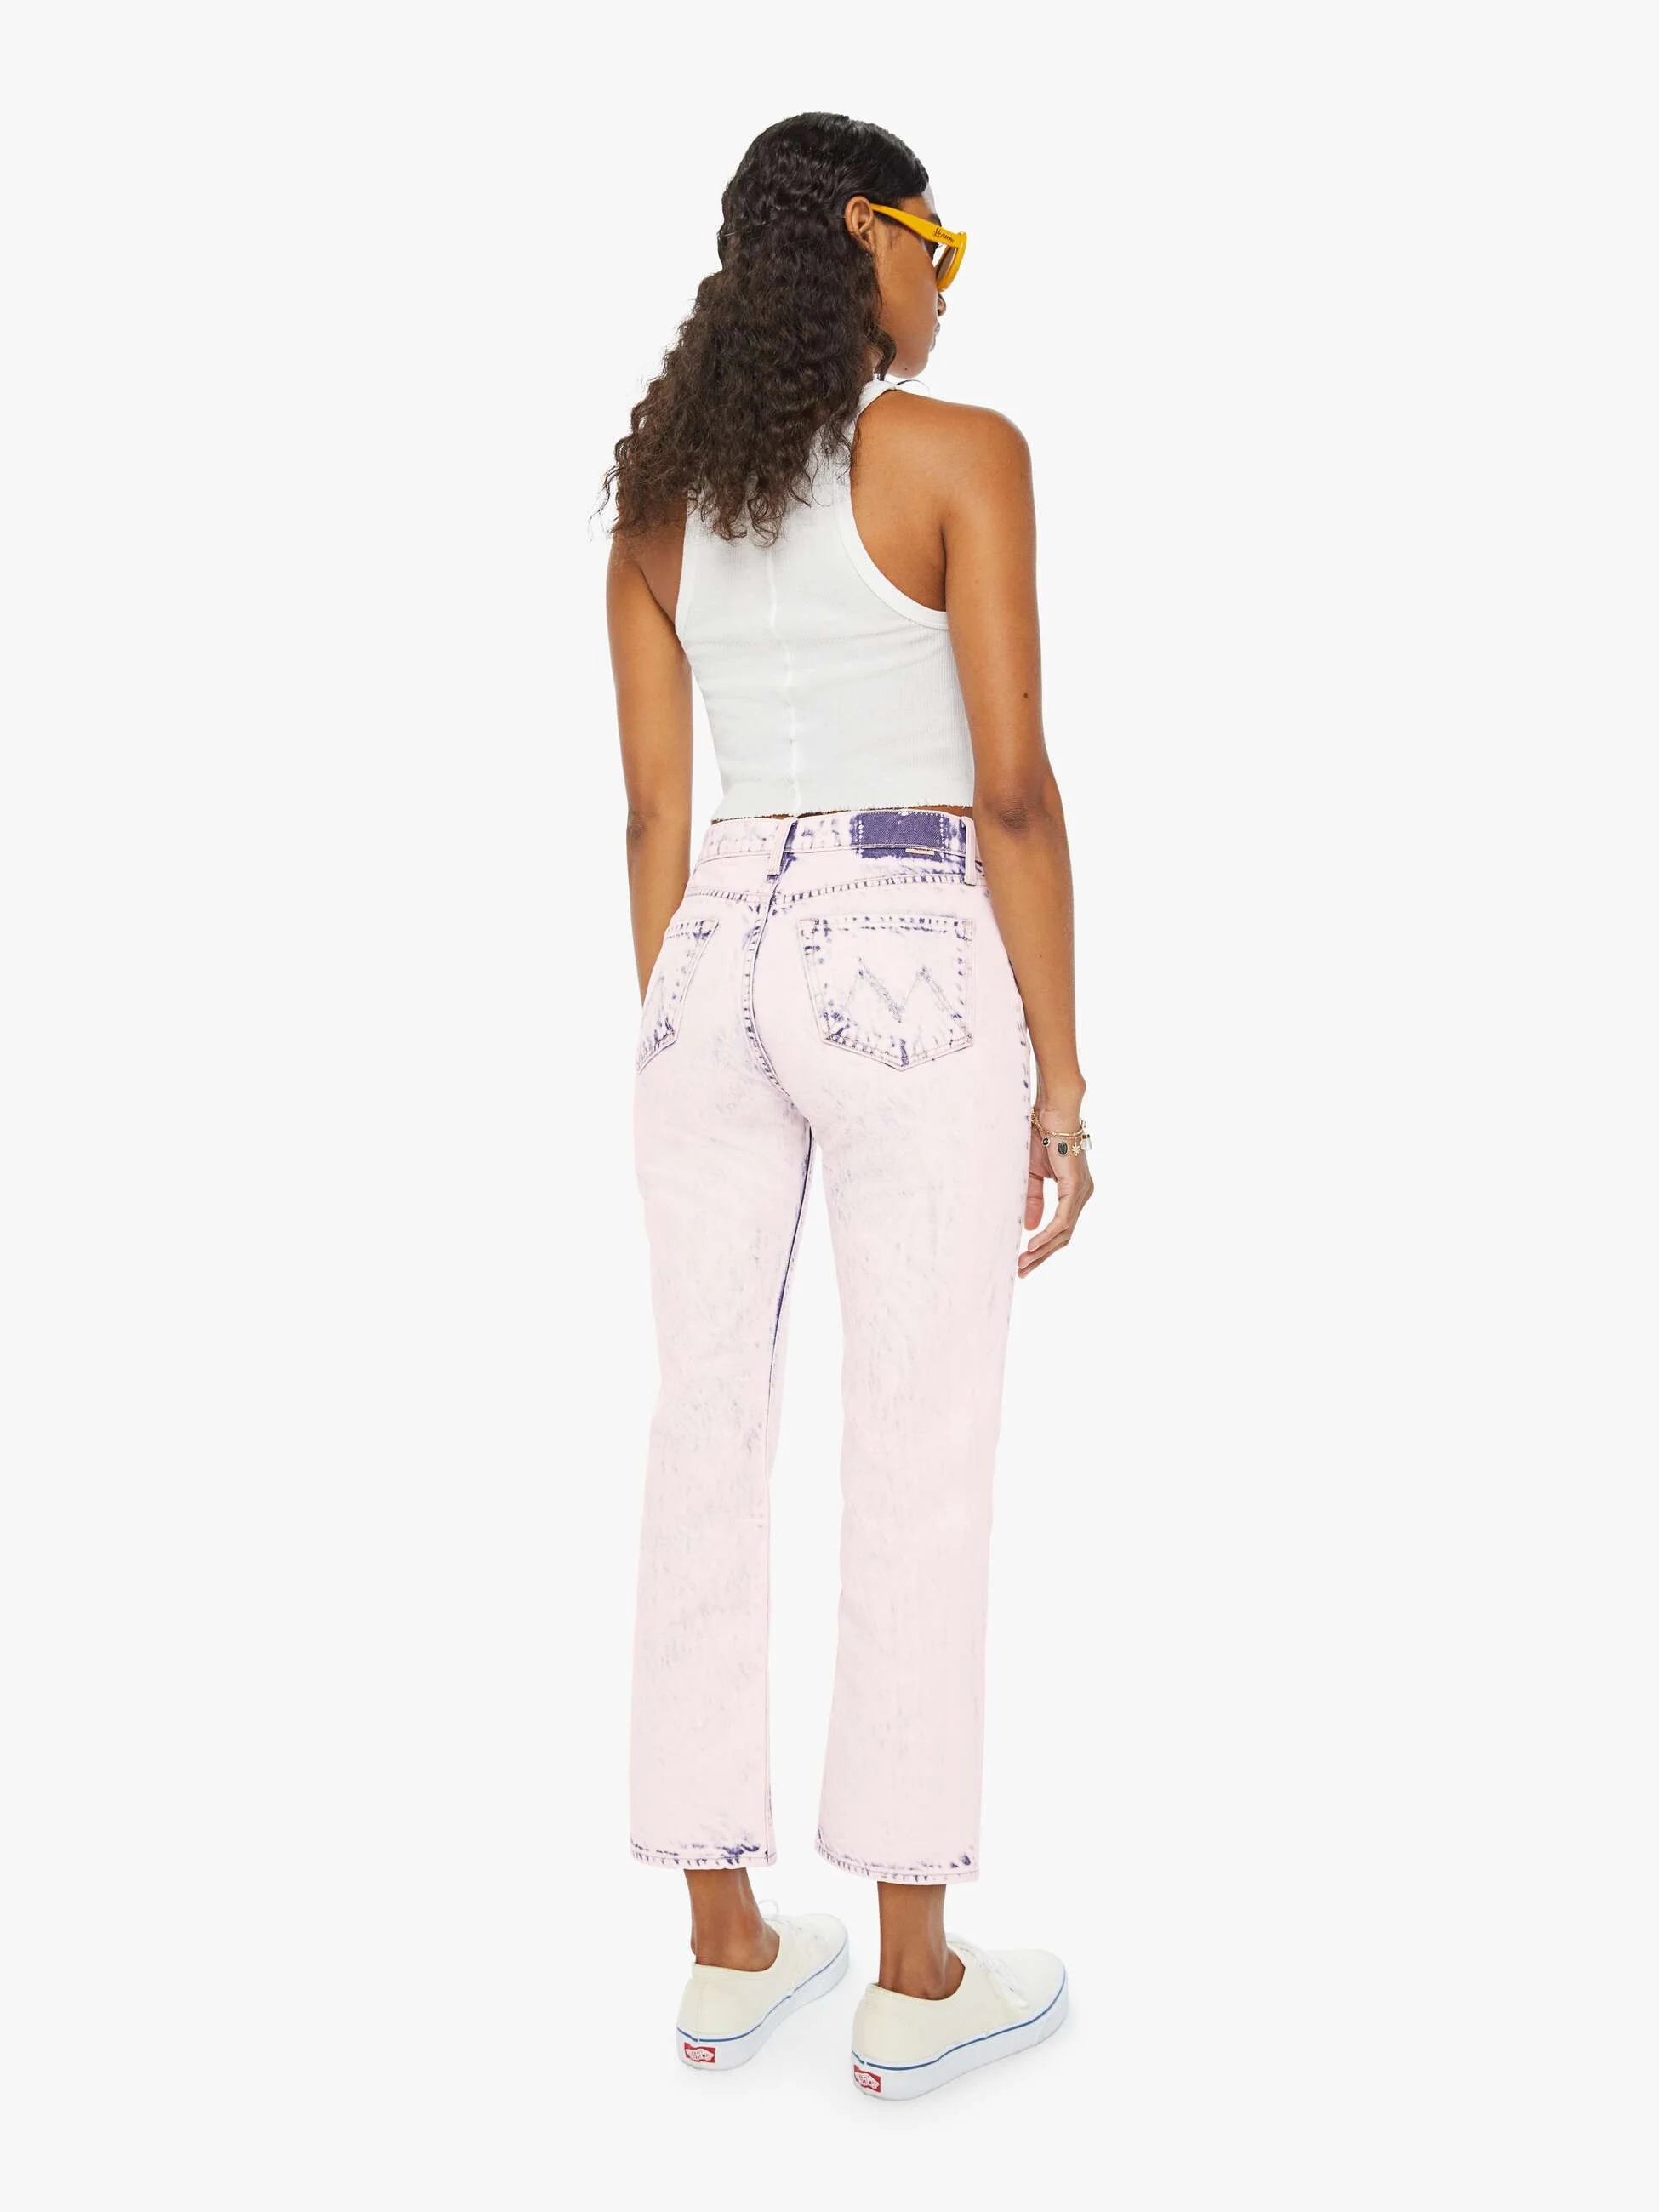 The High Waisted Rider Ankle Jean